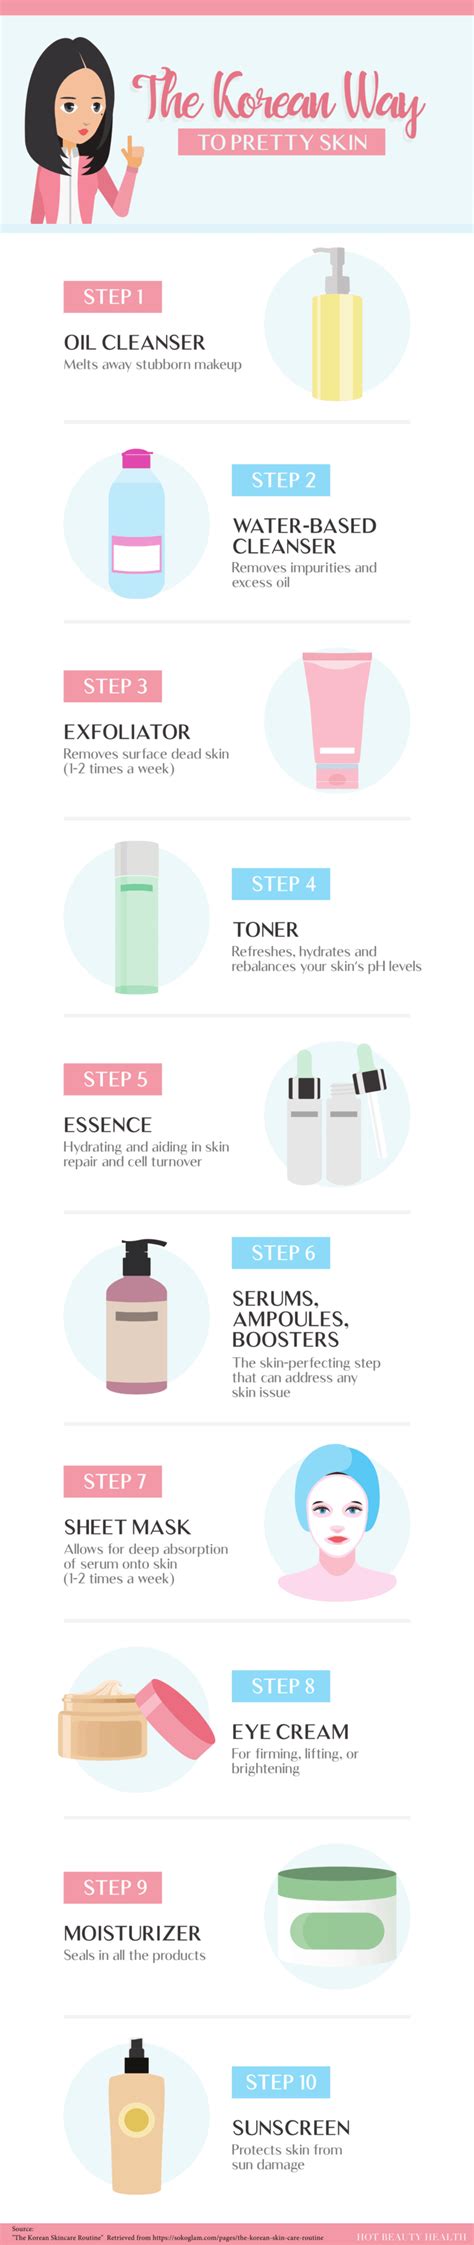 10 Step Skincare Routine 10 Step Skincare Routine Guide Tutorial Why